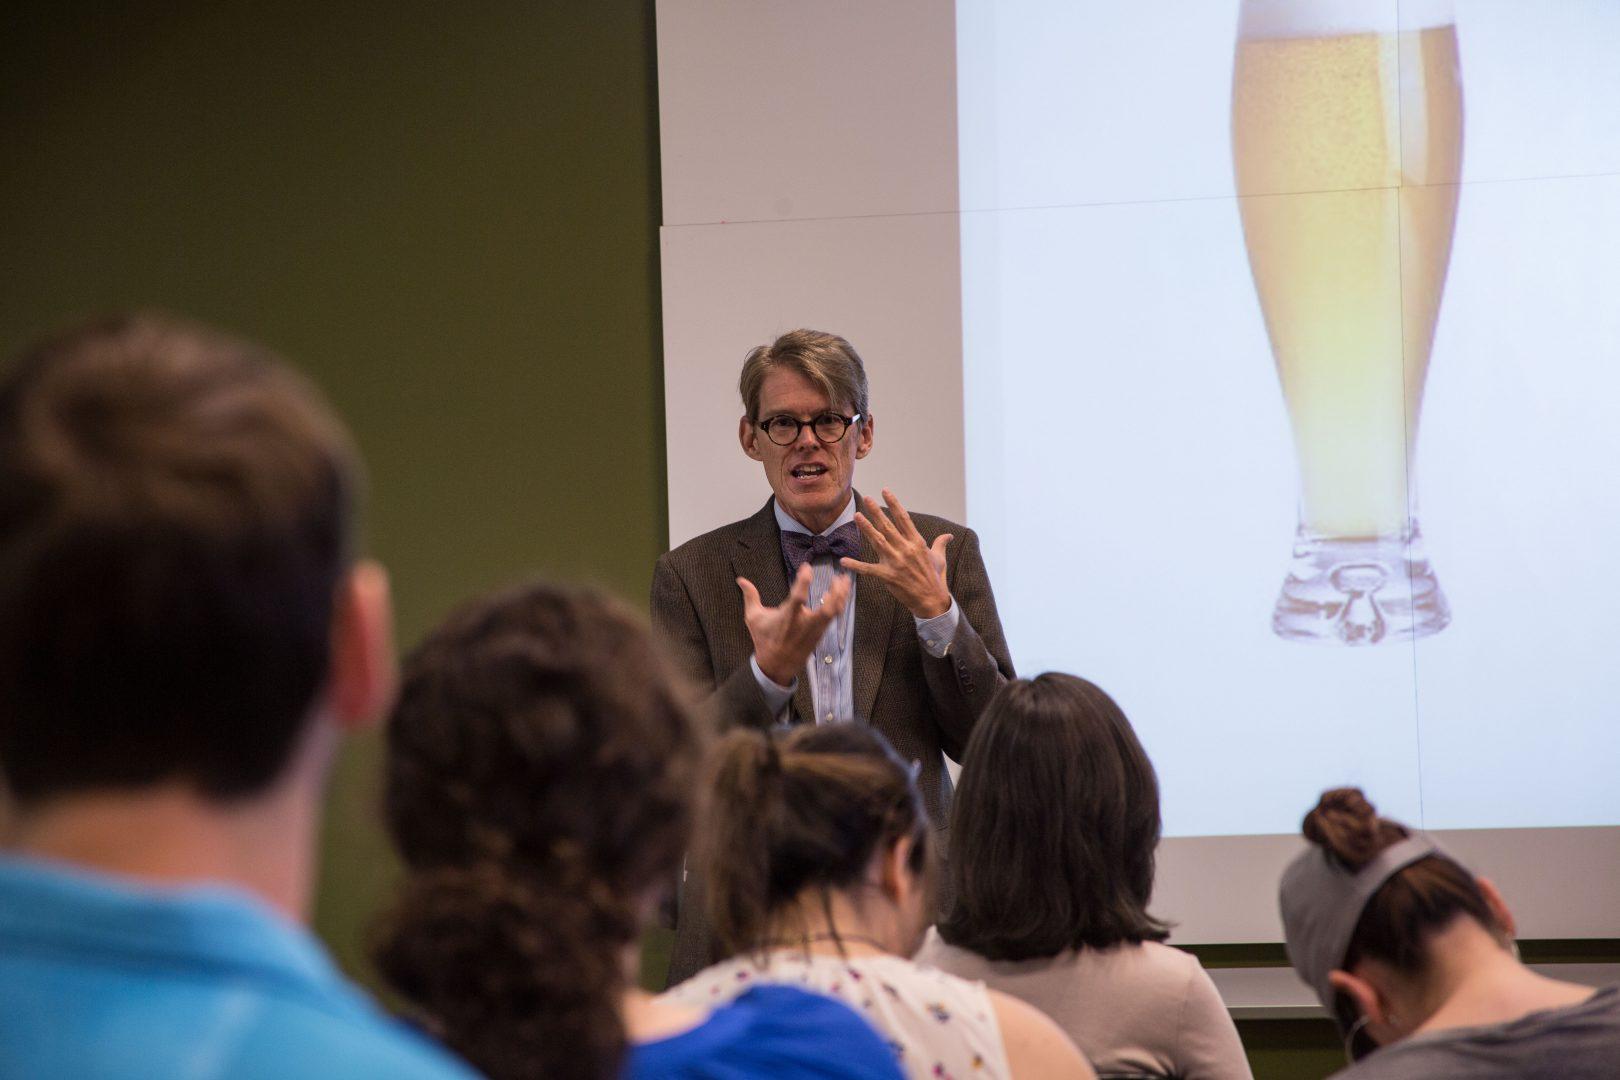 Dr.+Jeffrey+Pilcher+gives+a+talk+on+beer+history+to+students+in+the+Henry+Madden+Library+on+May+2%2C+2017.